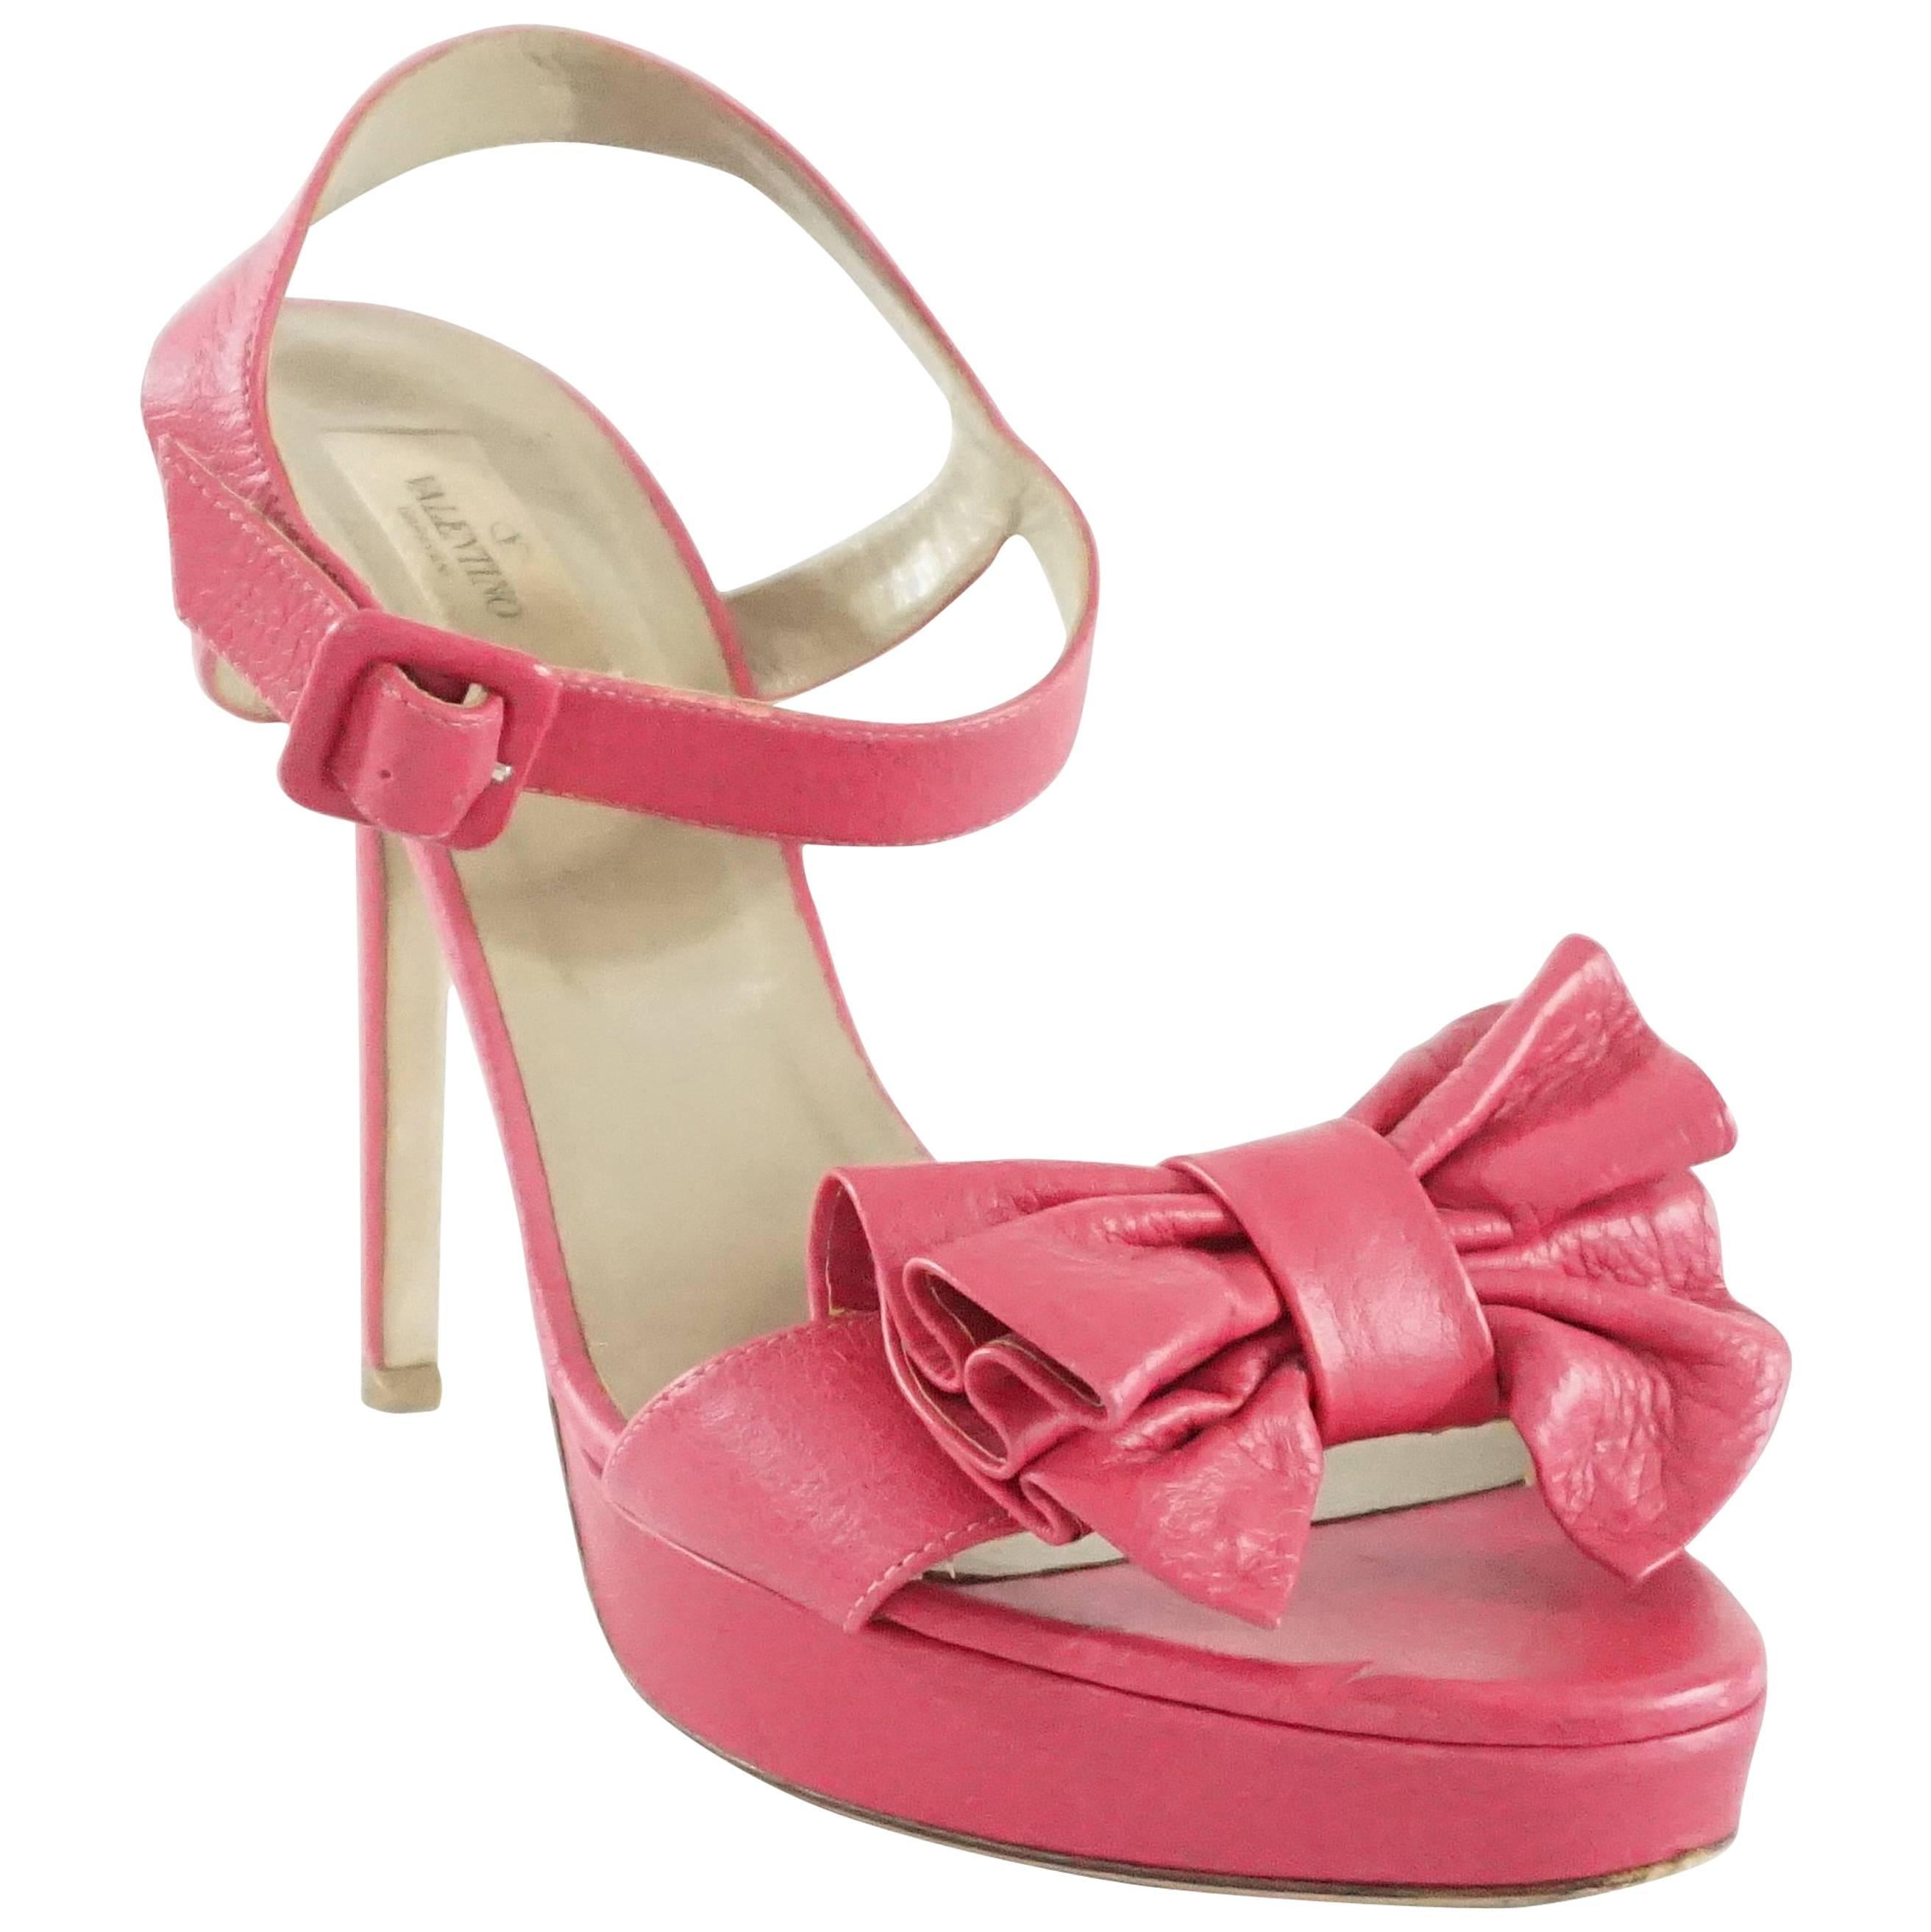 Valentino Pink Leather Bow Heels - 41